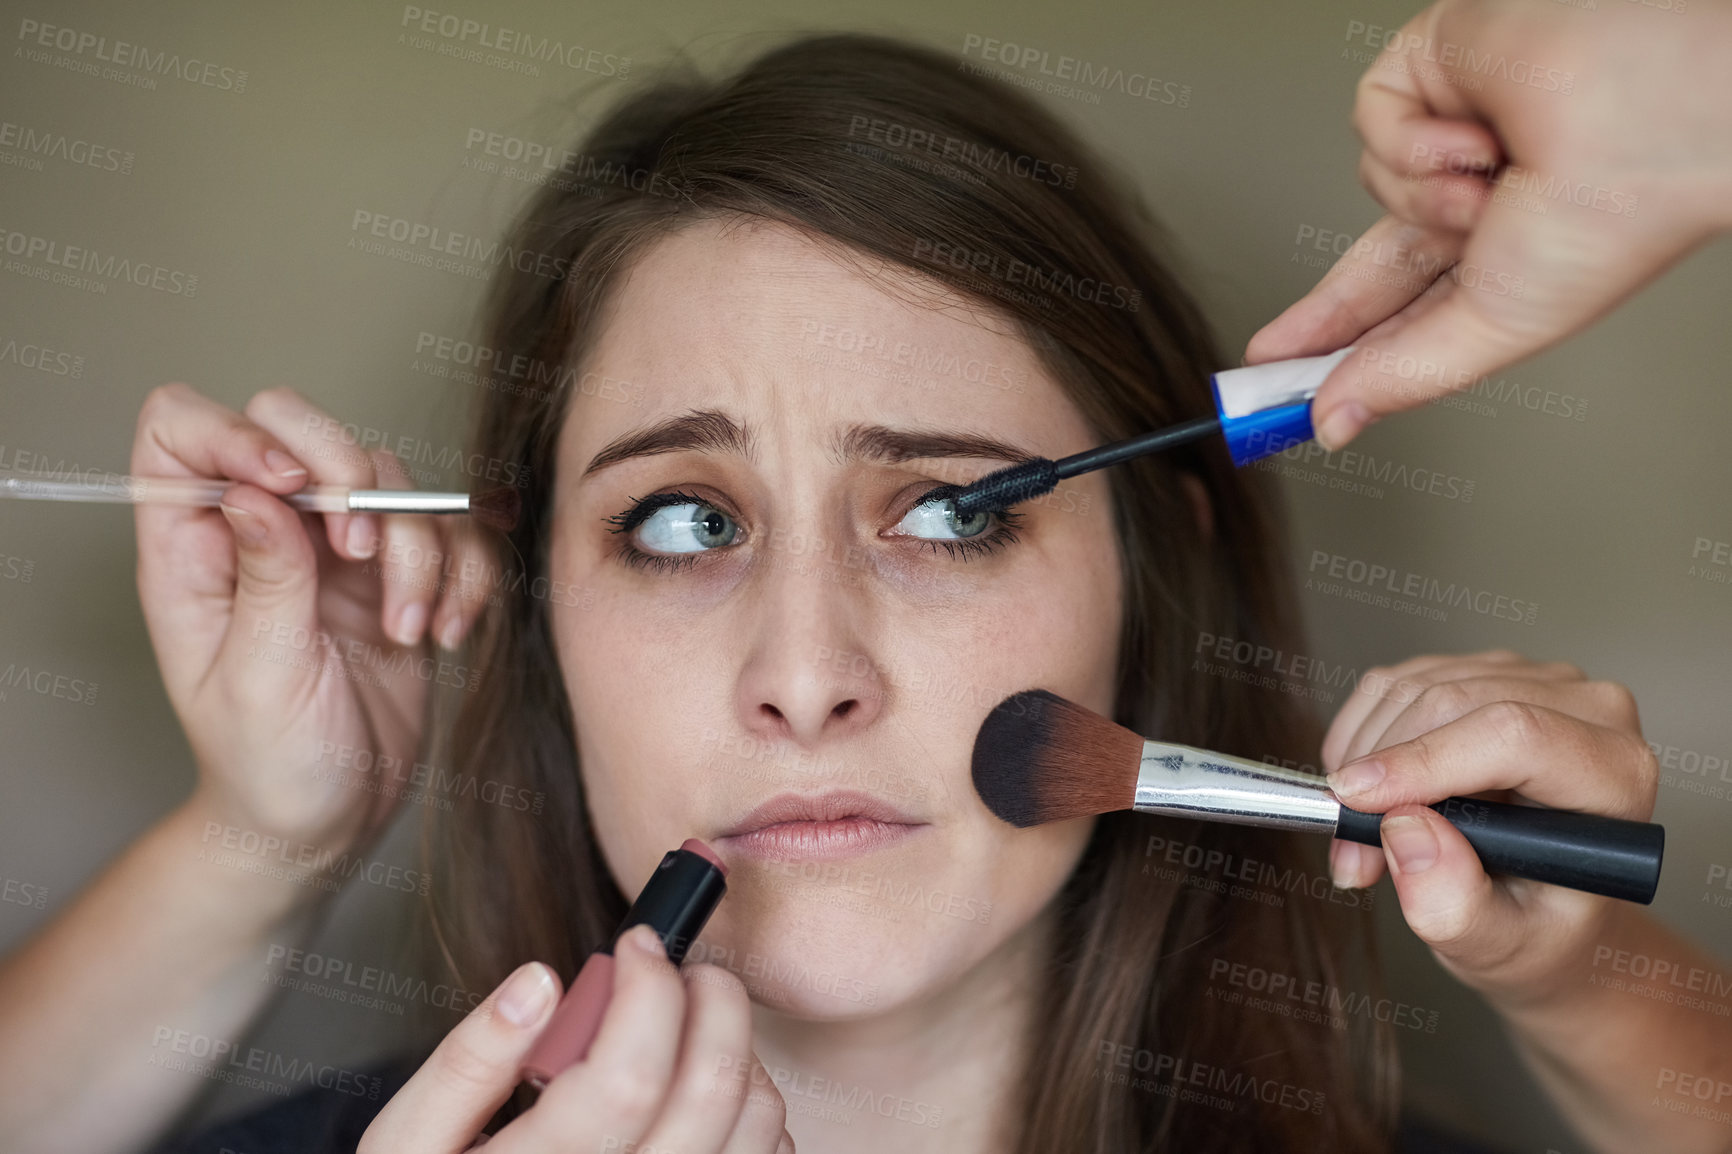 Buy stock photo Concept shot of a nervous looking young woman with an assortment of brushes applying makeup to her face